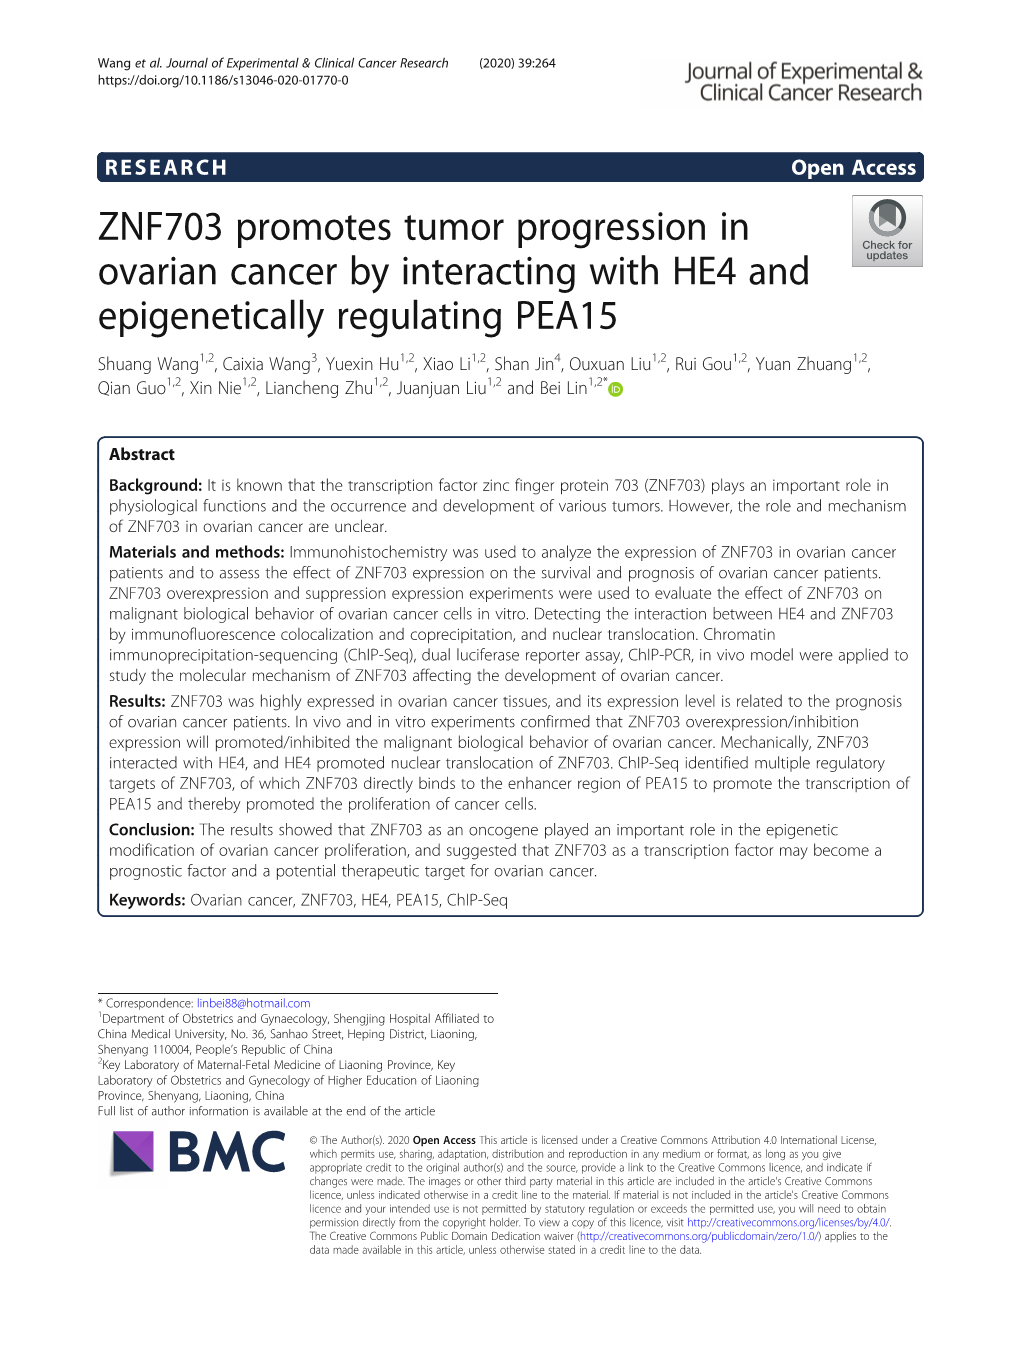 ZNF703 Promotes Tumor Progression in Ovarian Cancer by Interacting With